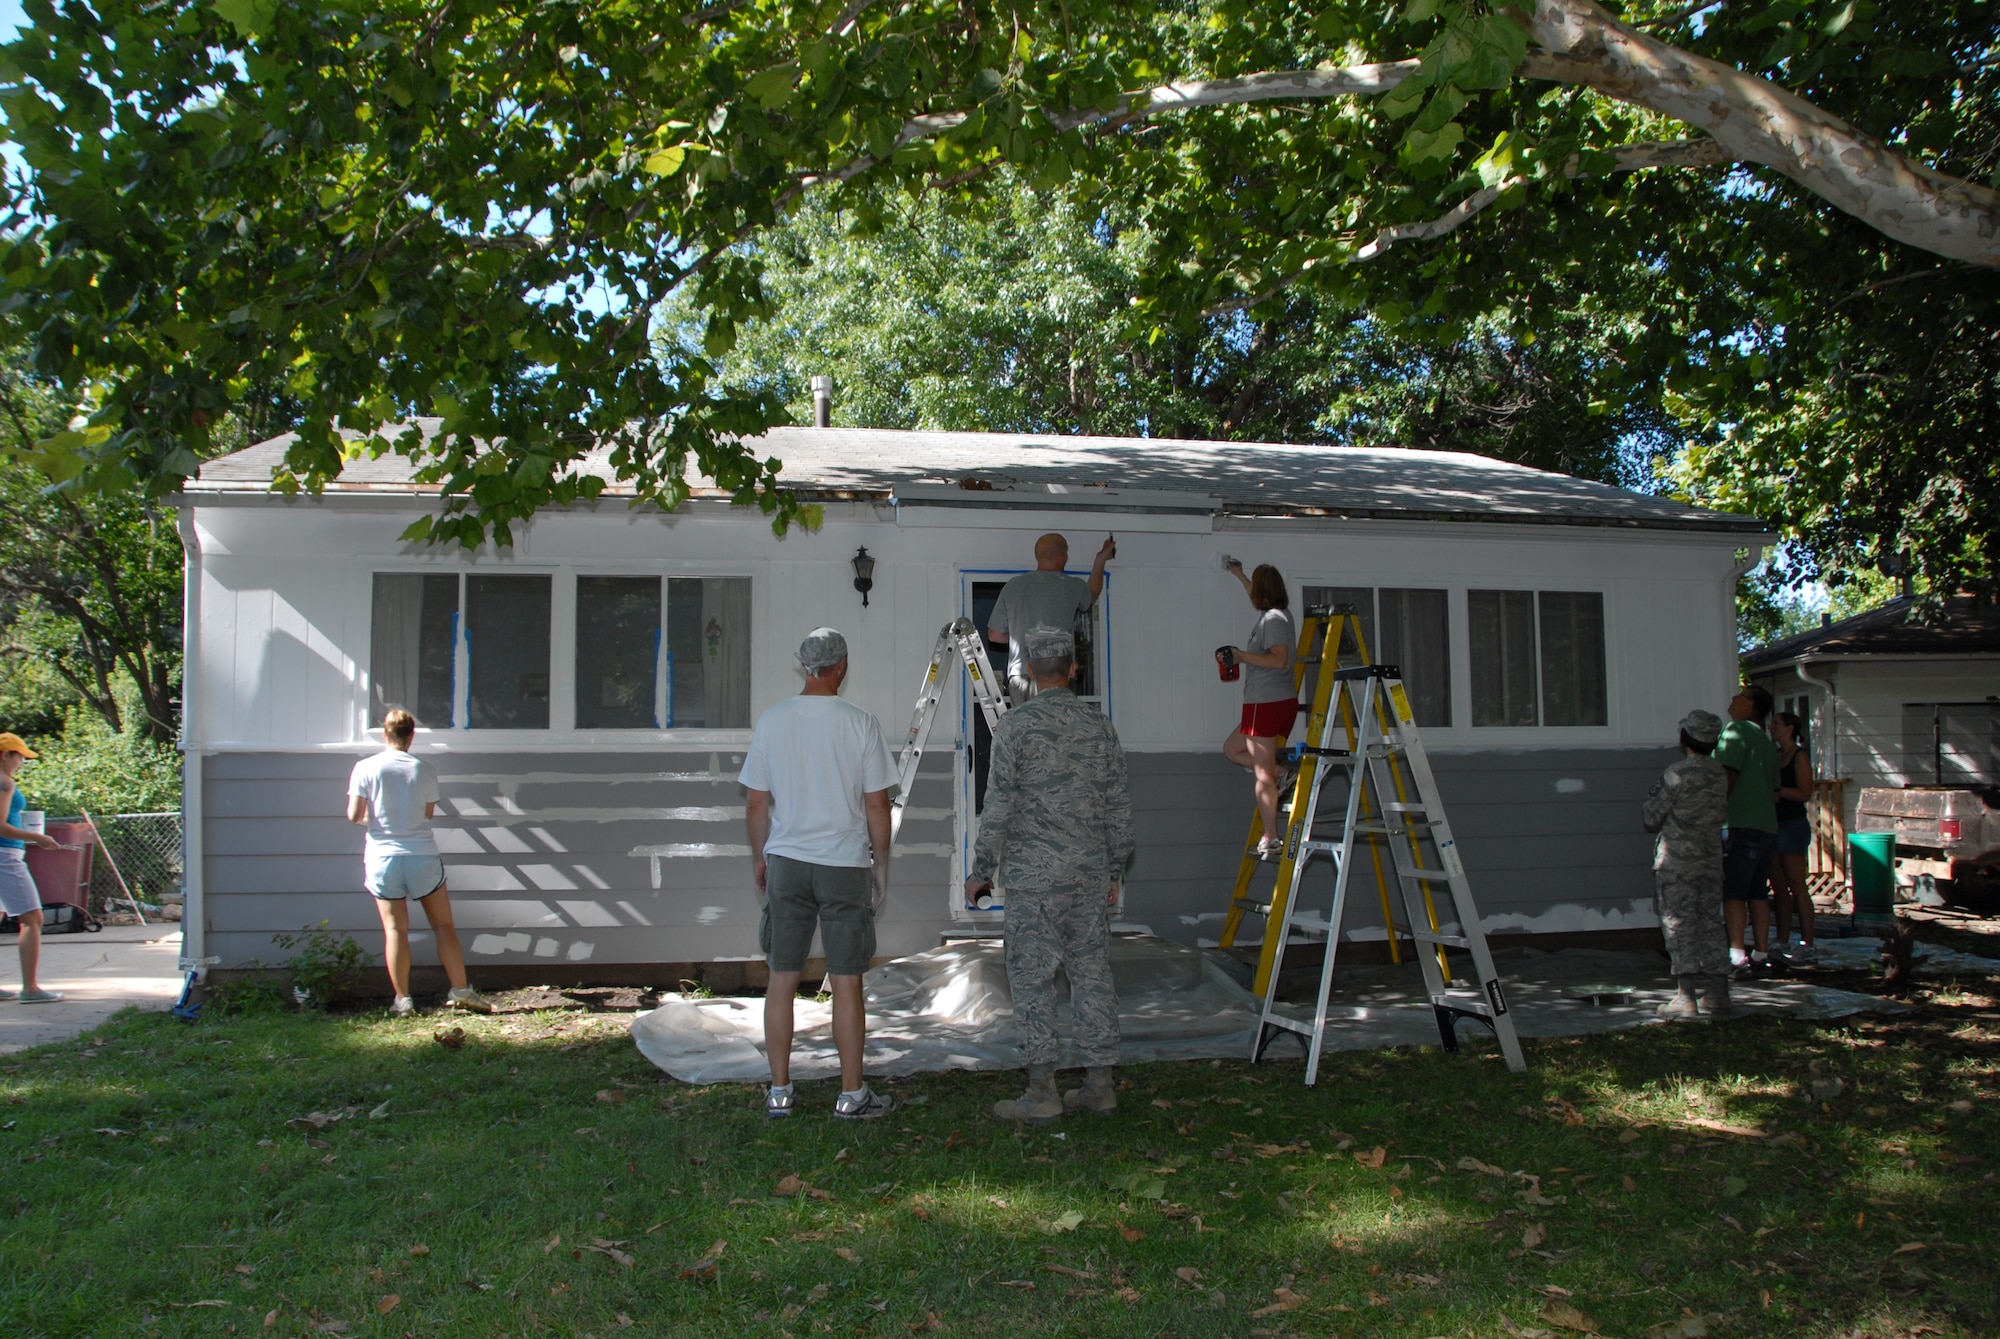 Members from the Nebraska Air and Army National Guard paint a house during the Lincoln Paint-a-thon hosted by Brush Up Nebraska in Lincoln, Neb. on Aug. 13, 2011. The home owners applied for this program through the Lincoln Action Program in 2010 and were approved in 2011.  (Nebraska Air National Guard photo by Airman First Class Mary Thach) (Released)